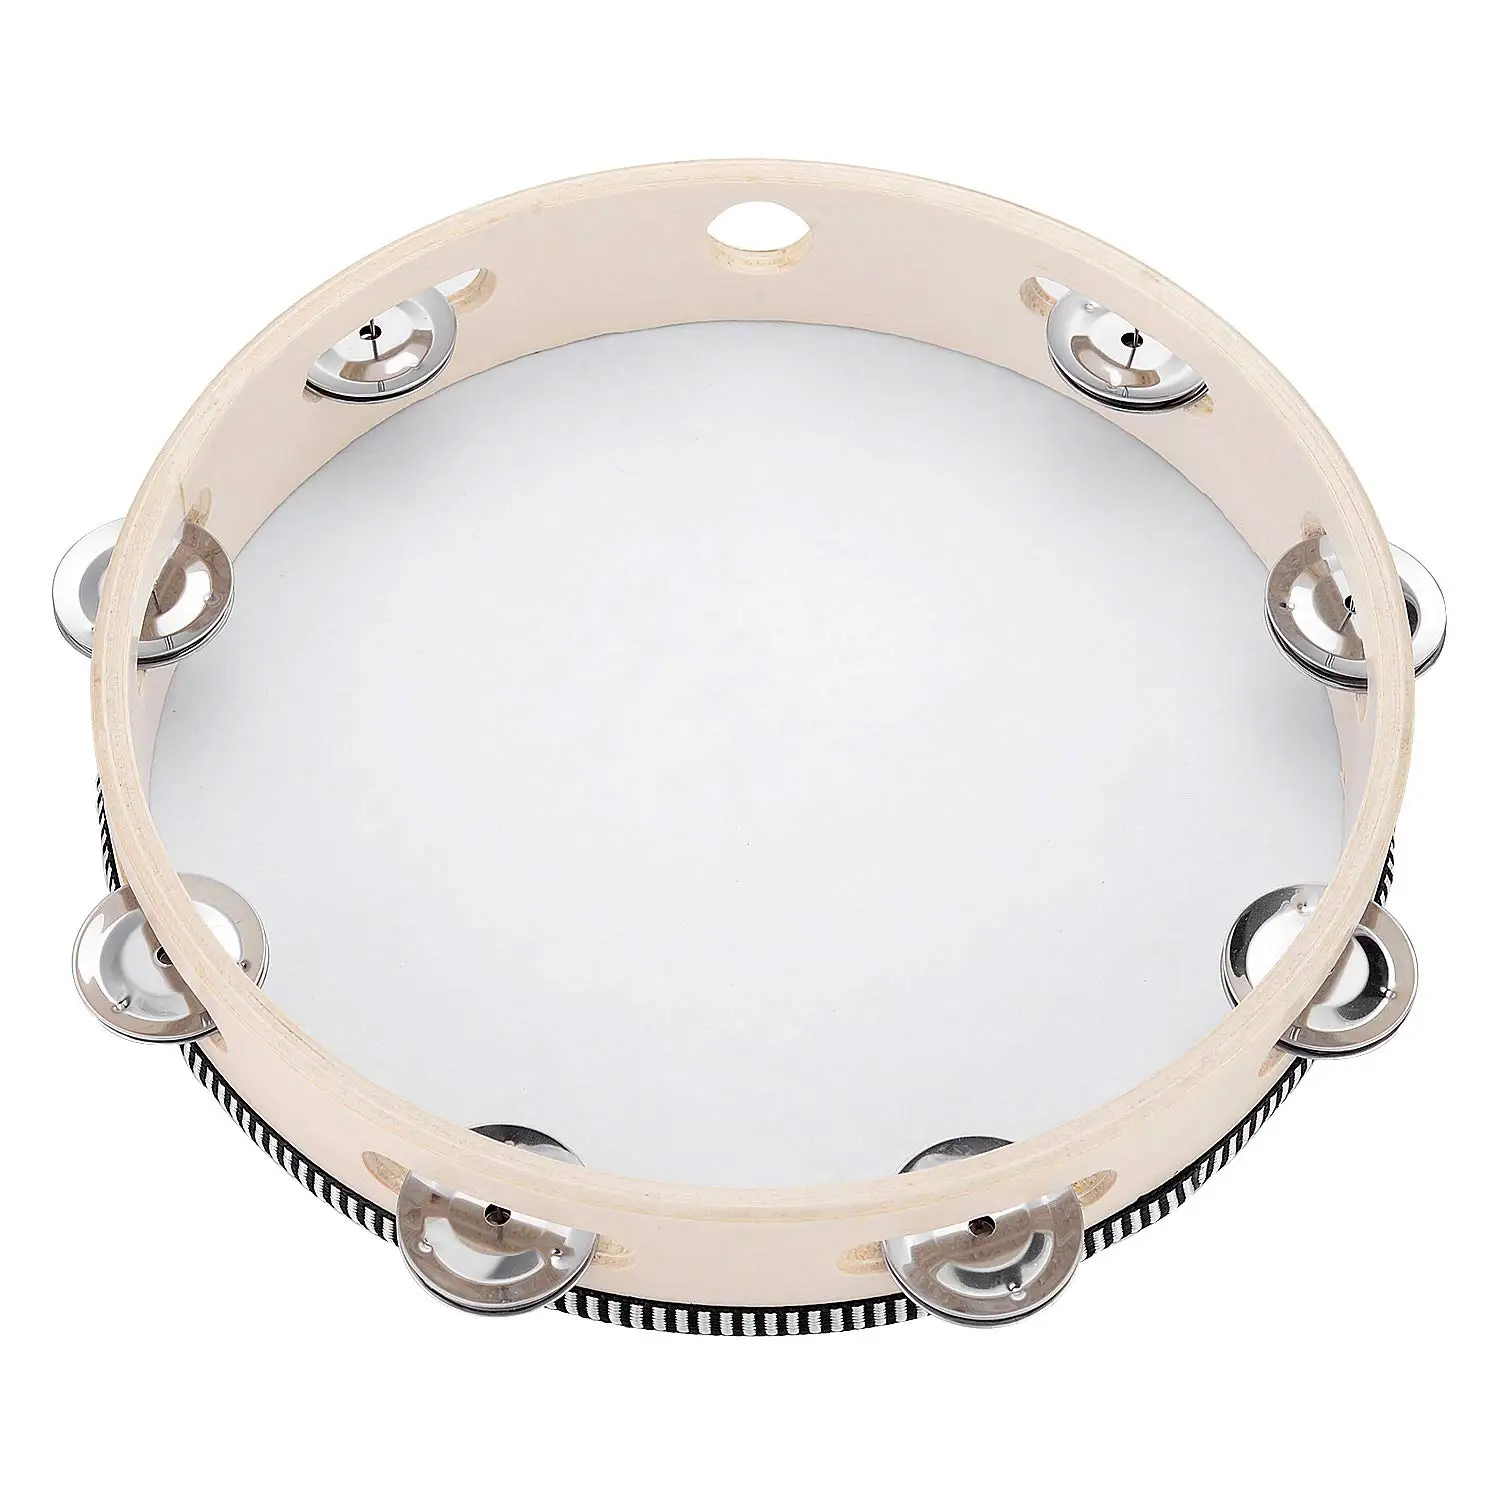 Sweet48 Beige Tambourine Beige 8 Hand Held Tambourine Drum Bell Birch Metal Jingles Percussion Musical Educational Toy Instrument for KTV Party Kids Games 